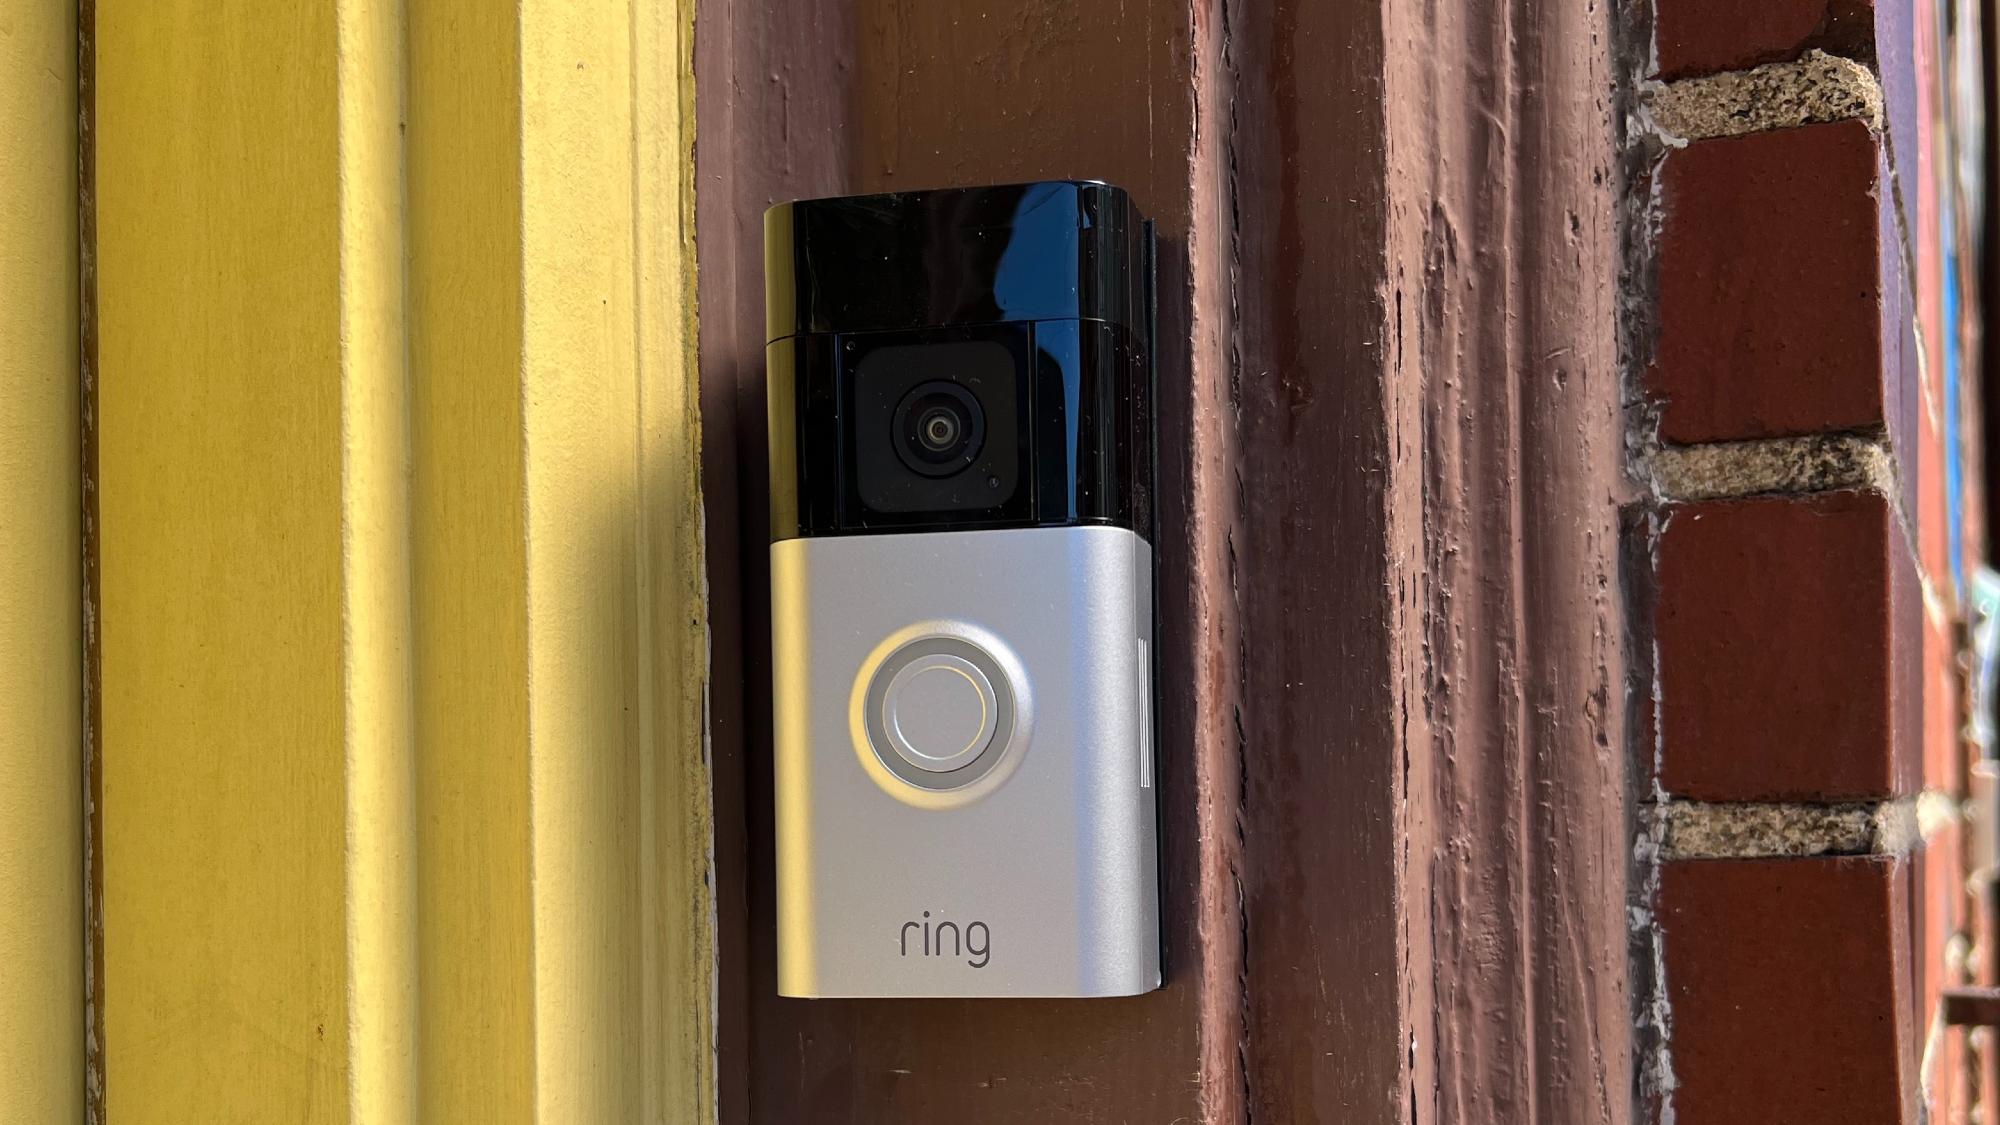 Adding notifications to dumb push-button doorbell without neutral wire -  Hardware - Home Assistant Community